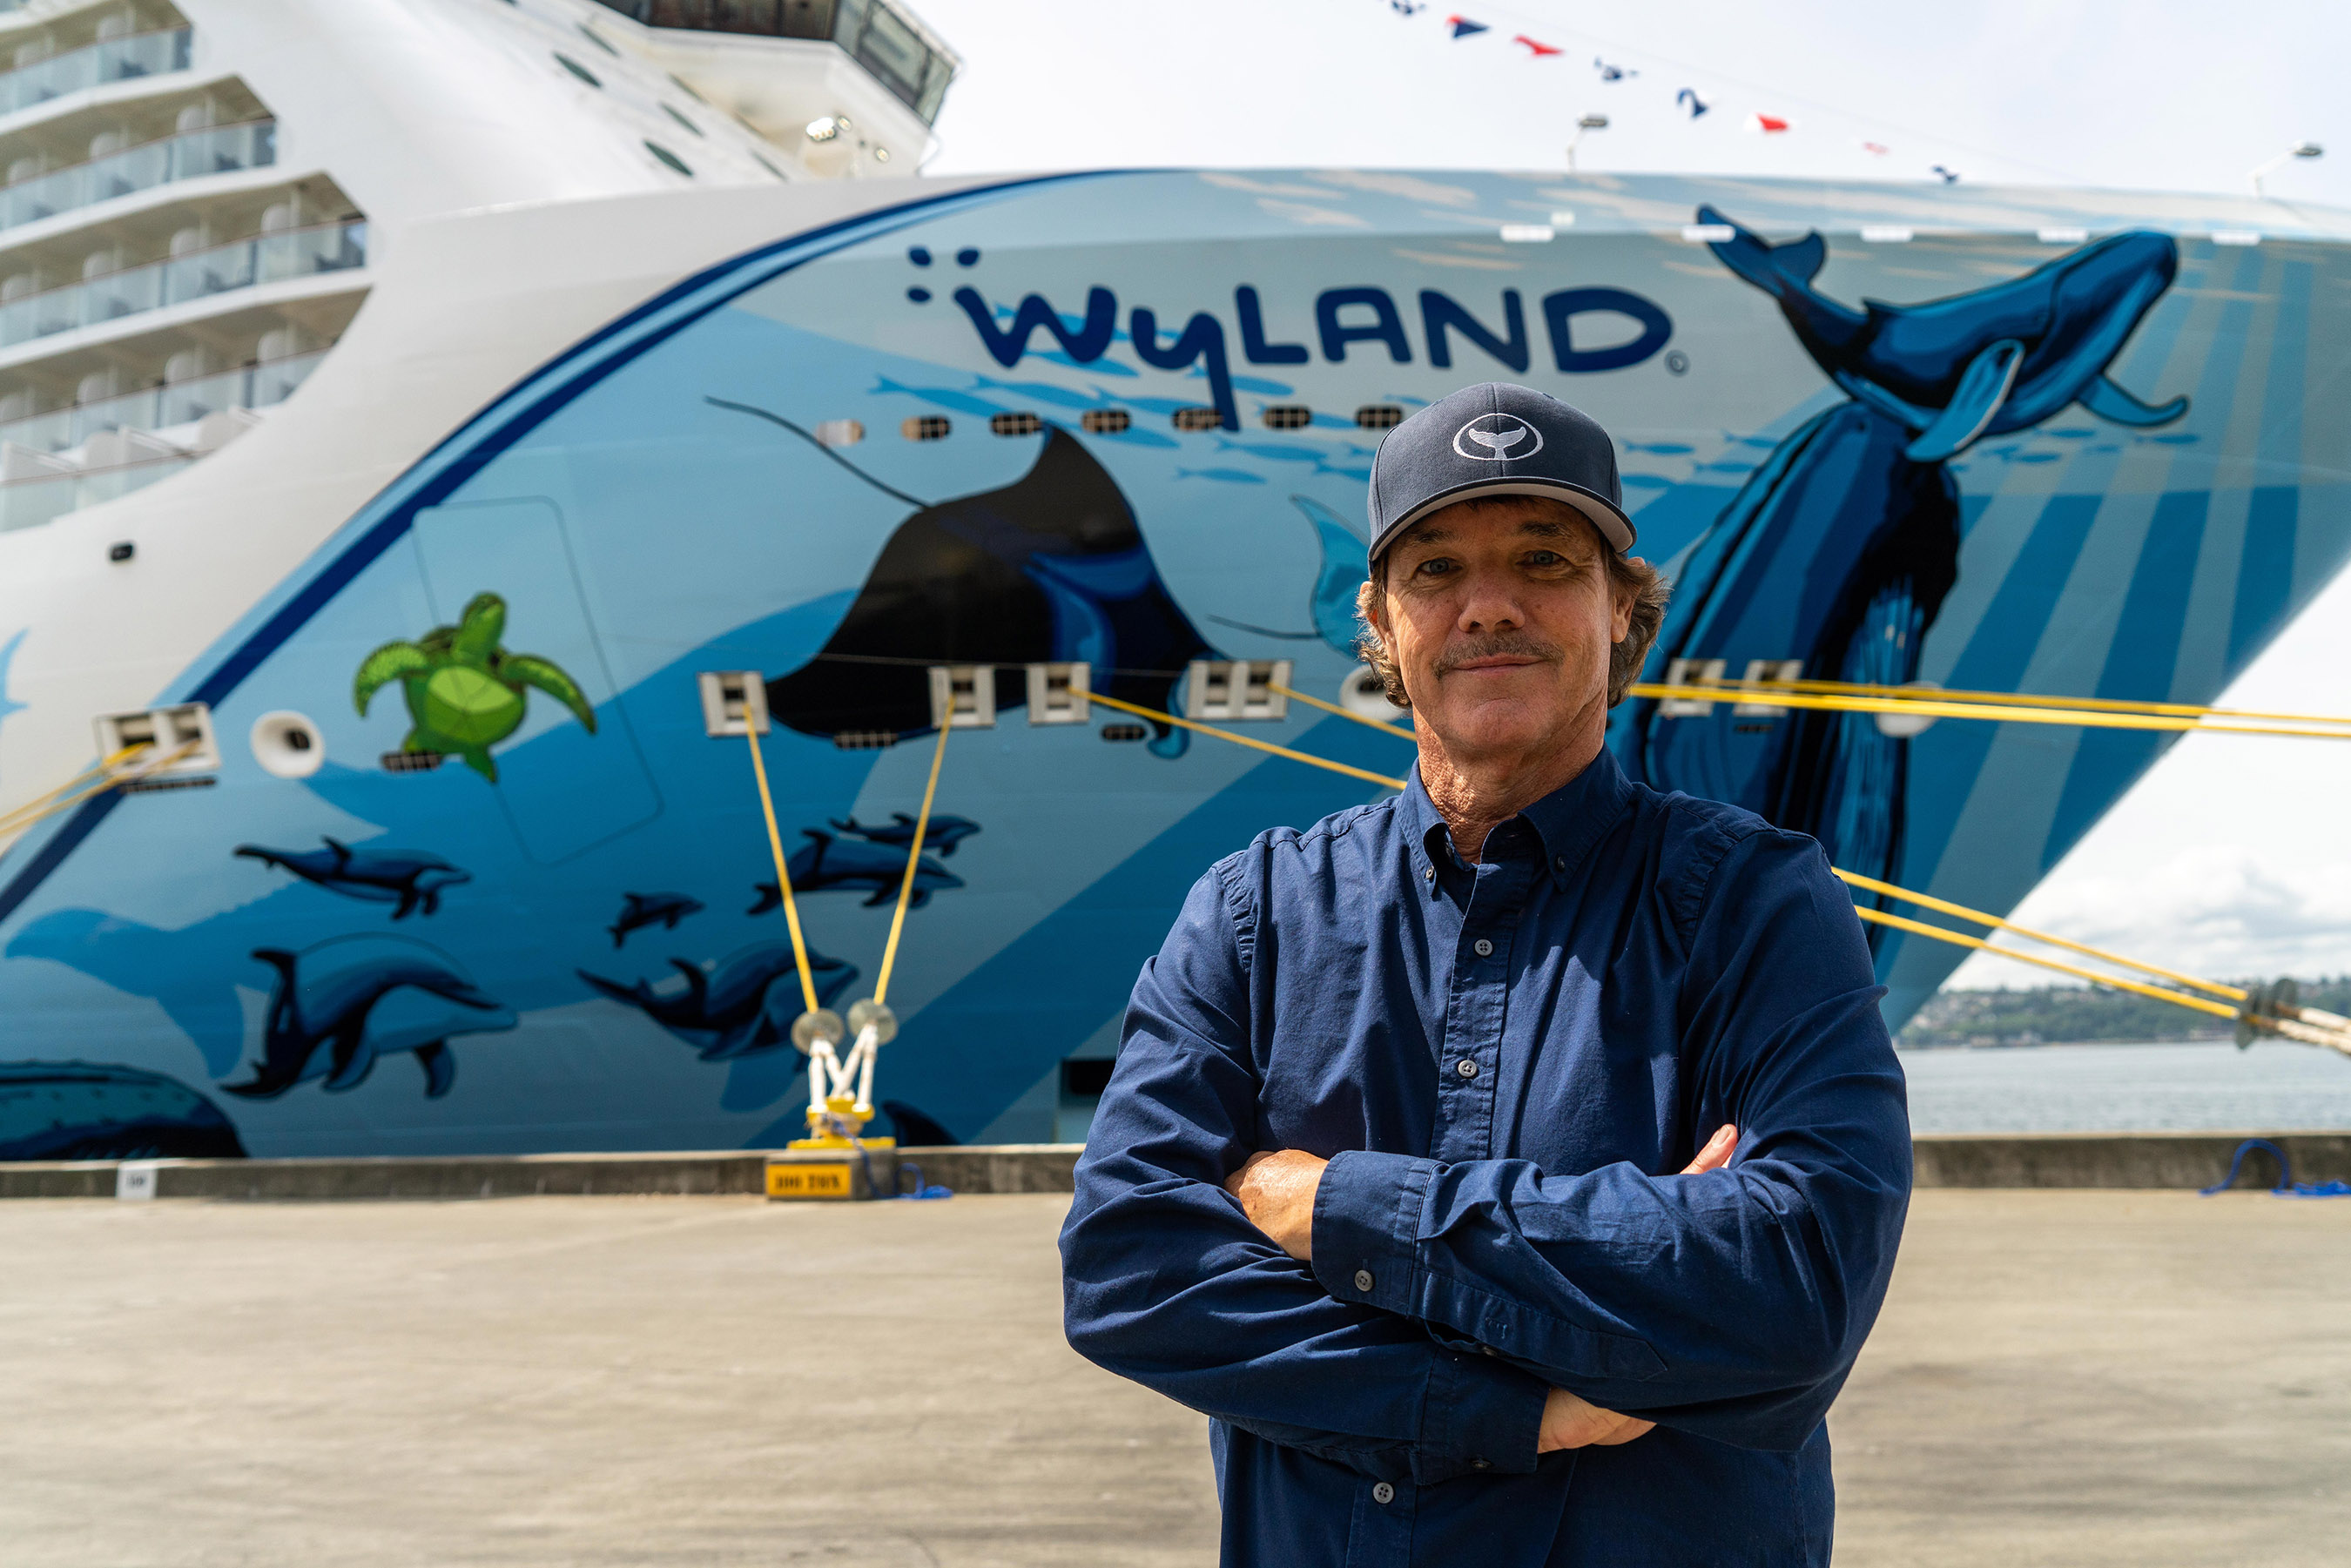 Renowned marine life artist and conservationist, Wyland, in front of his hull art on Norwegian Bliss